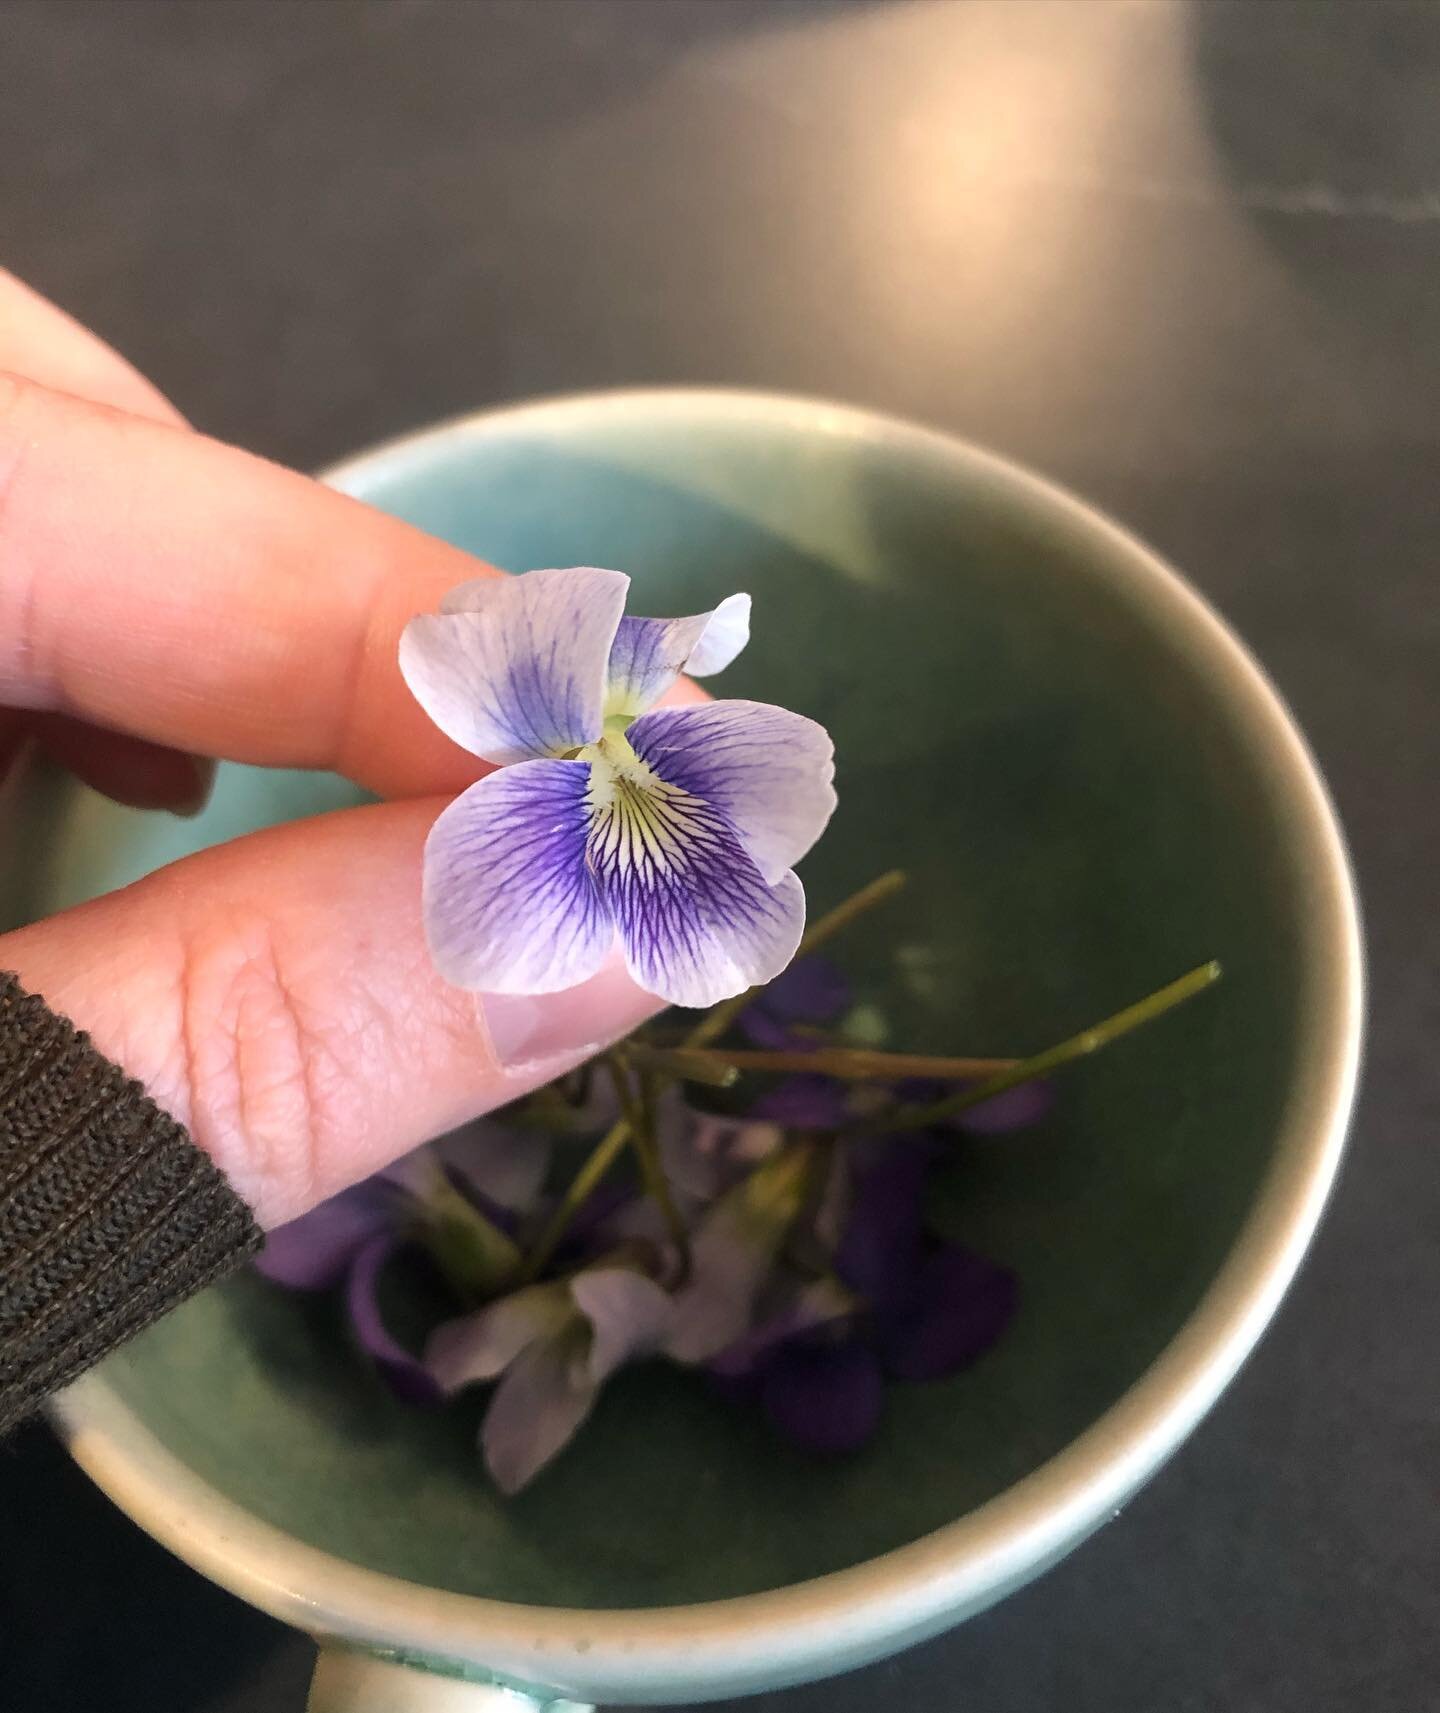 To remind me of a week in small moments; the ones where the joy of collecting garden violets, opening a multi colored carton of eggs from the farm,a handful of foraged ramps left on the porch by a neighbor, blooming trees, blooming orchid shadows, a 